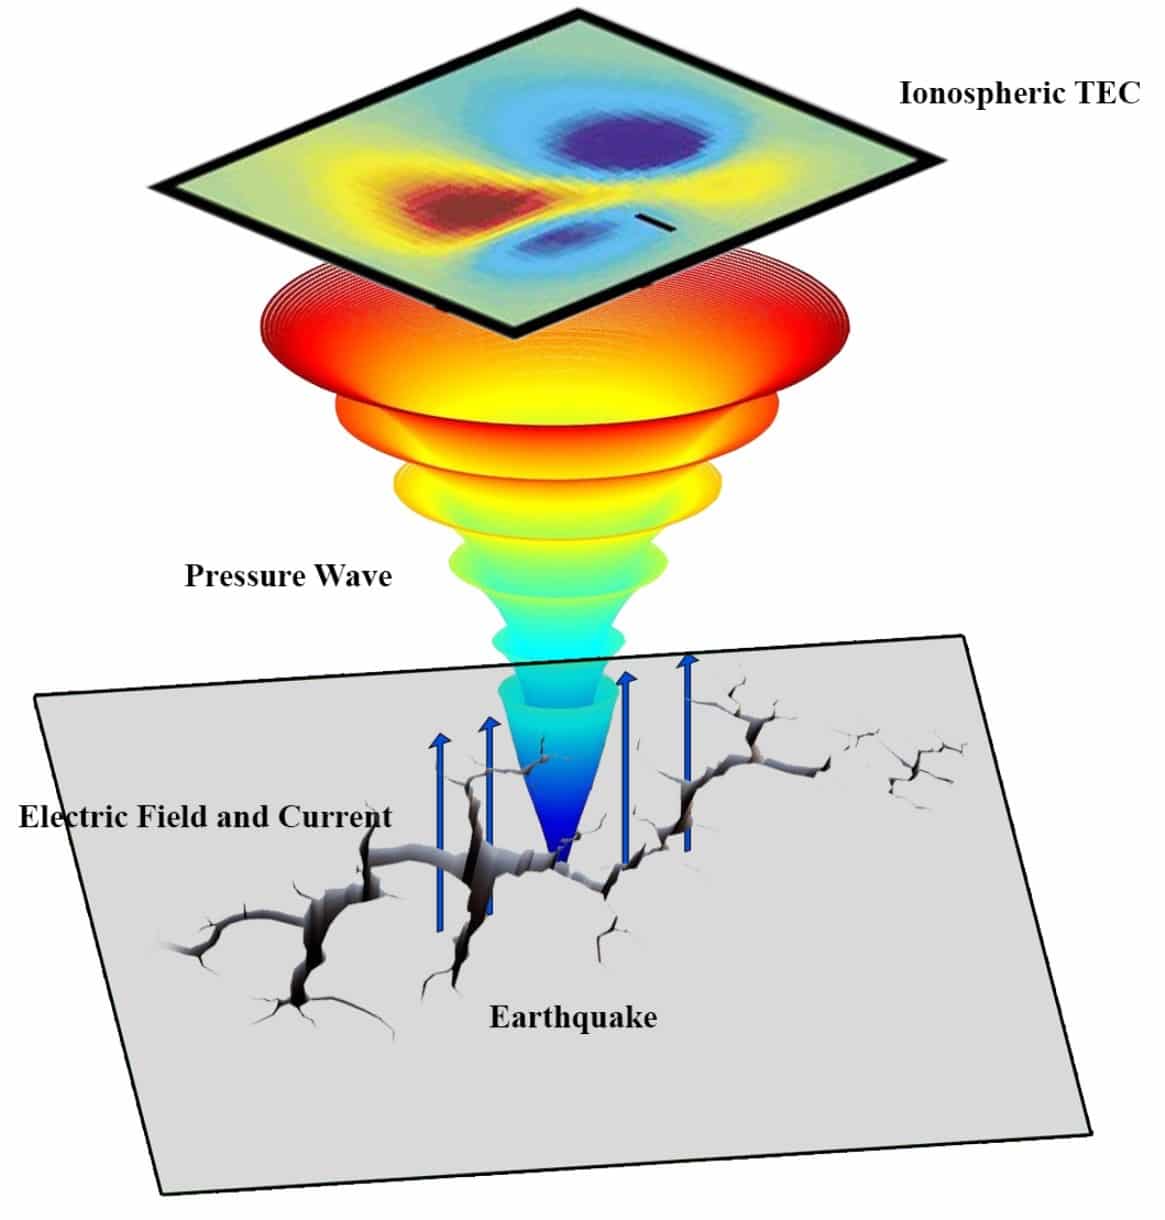 Illustration of a possible mechanism for creating a disturbance in the electron charge density in the ionosphere before an earthquake. From the study